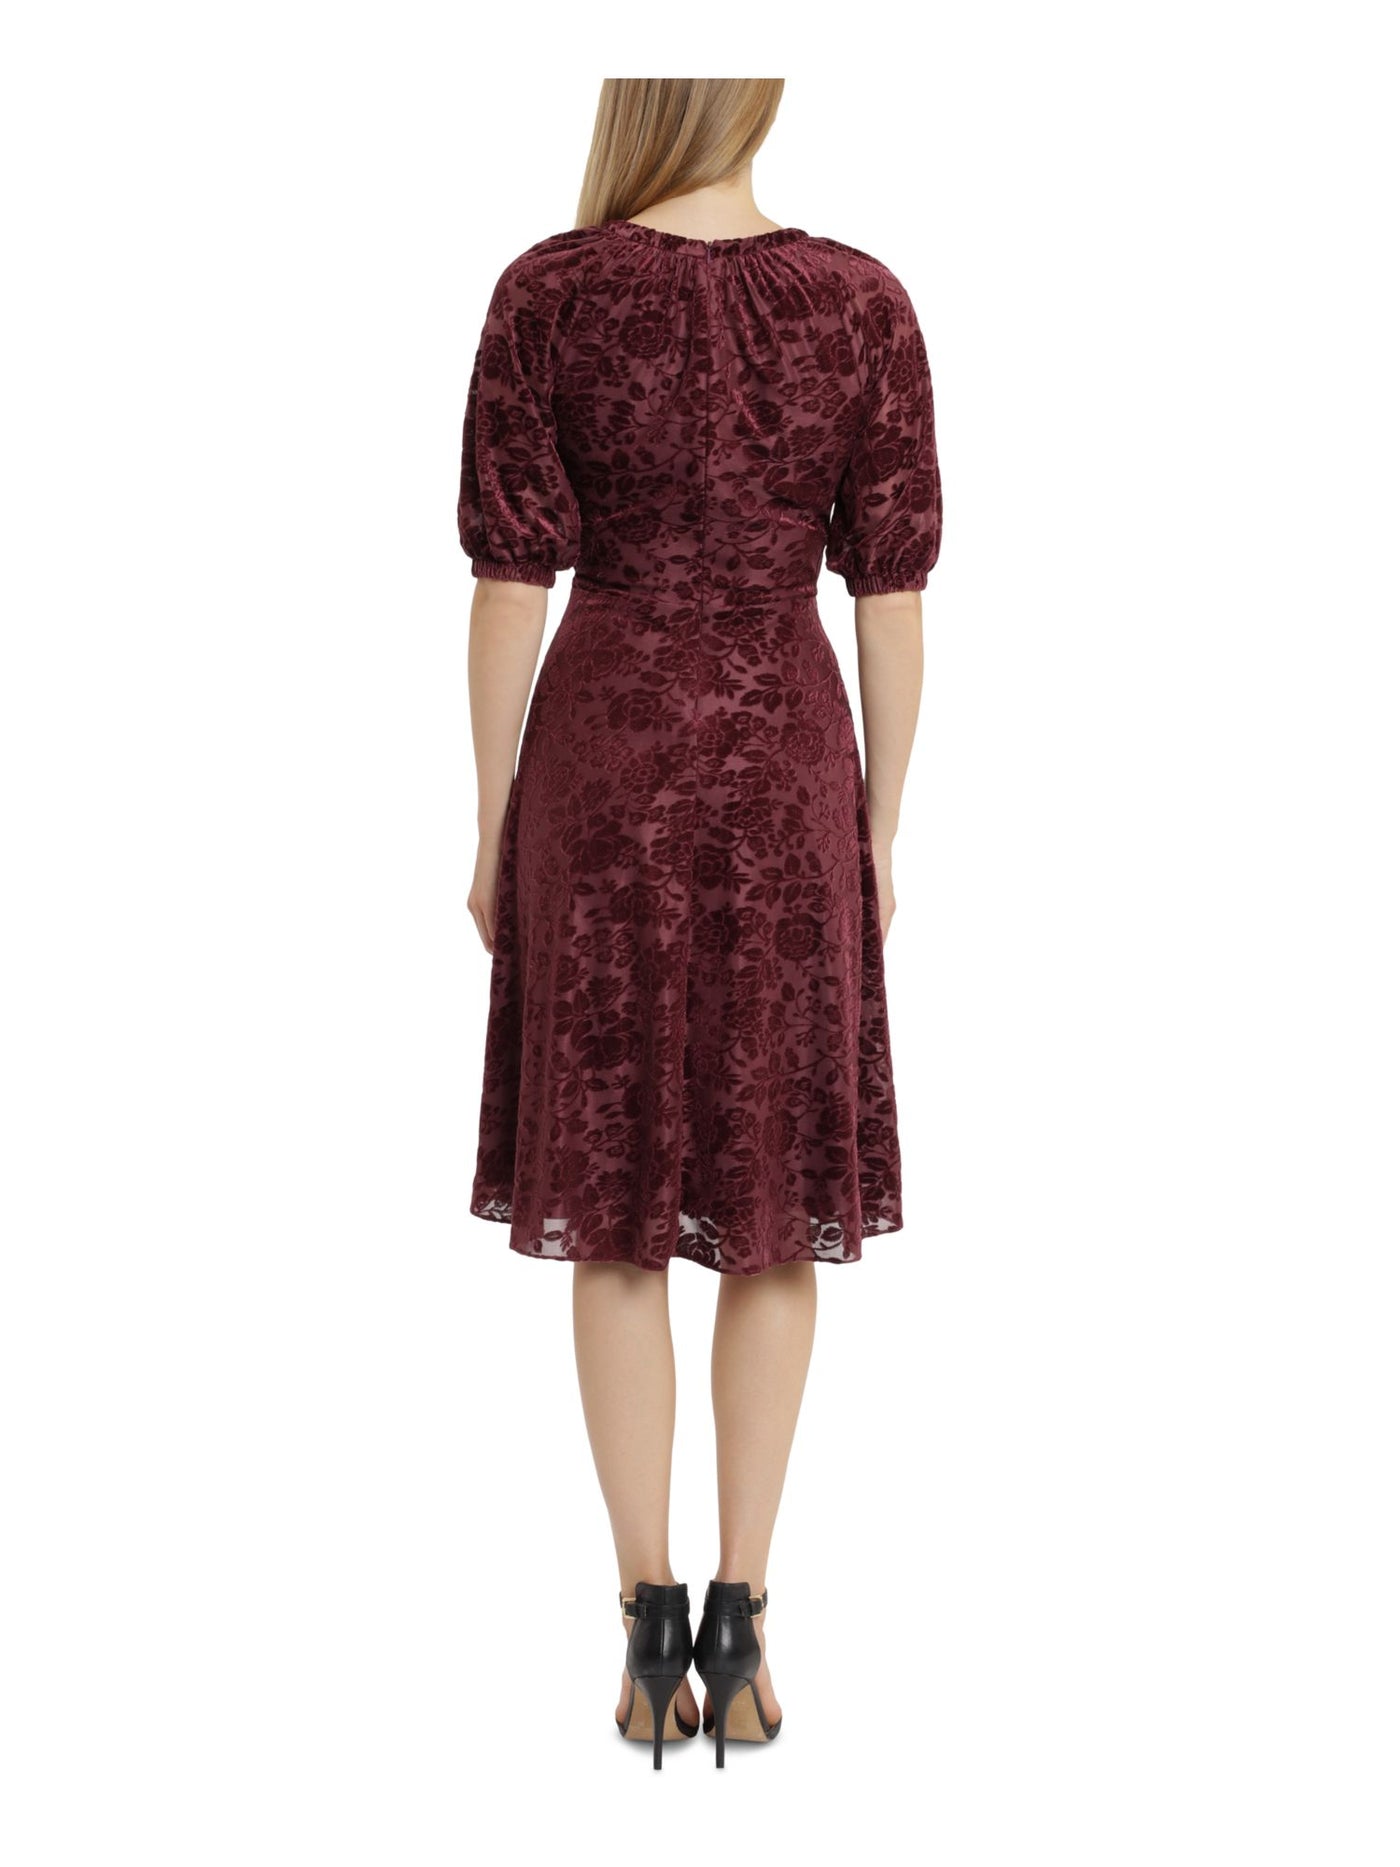 LONDON TIMES Womens Burgundy Zippered Gathered Burnout Velvet Lined Floral Elbow Sleeve Jewel Neck Below The Knee Wear To Work Fit + Flare Dress Petites 8P